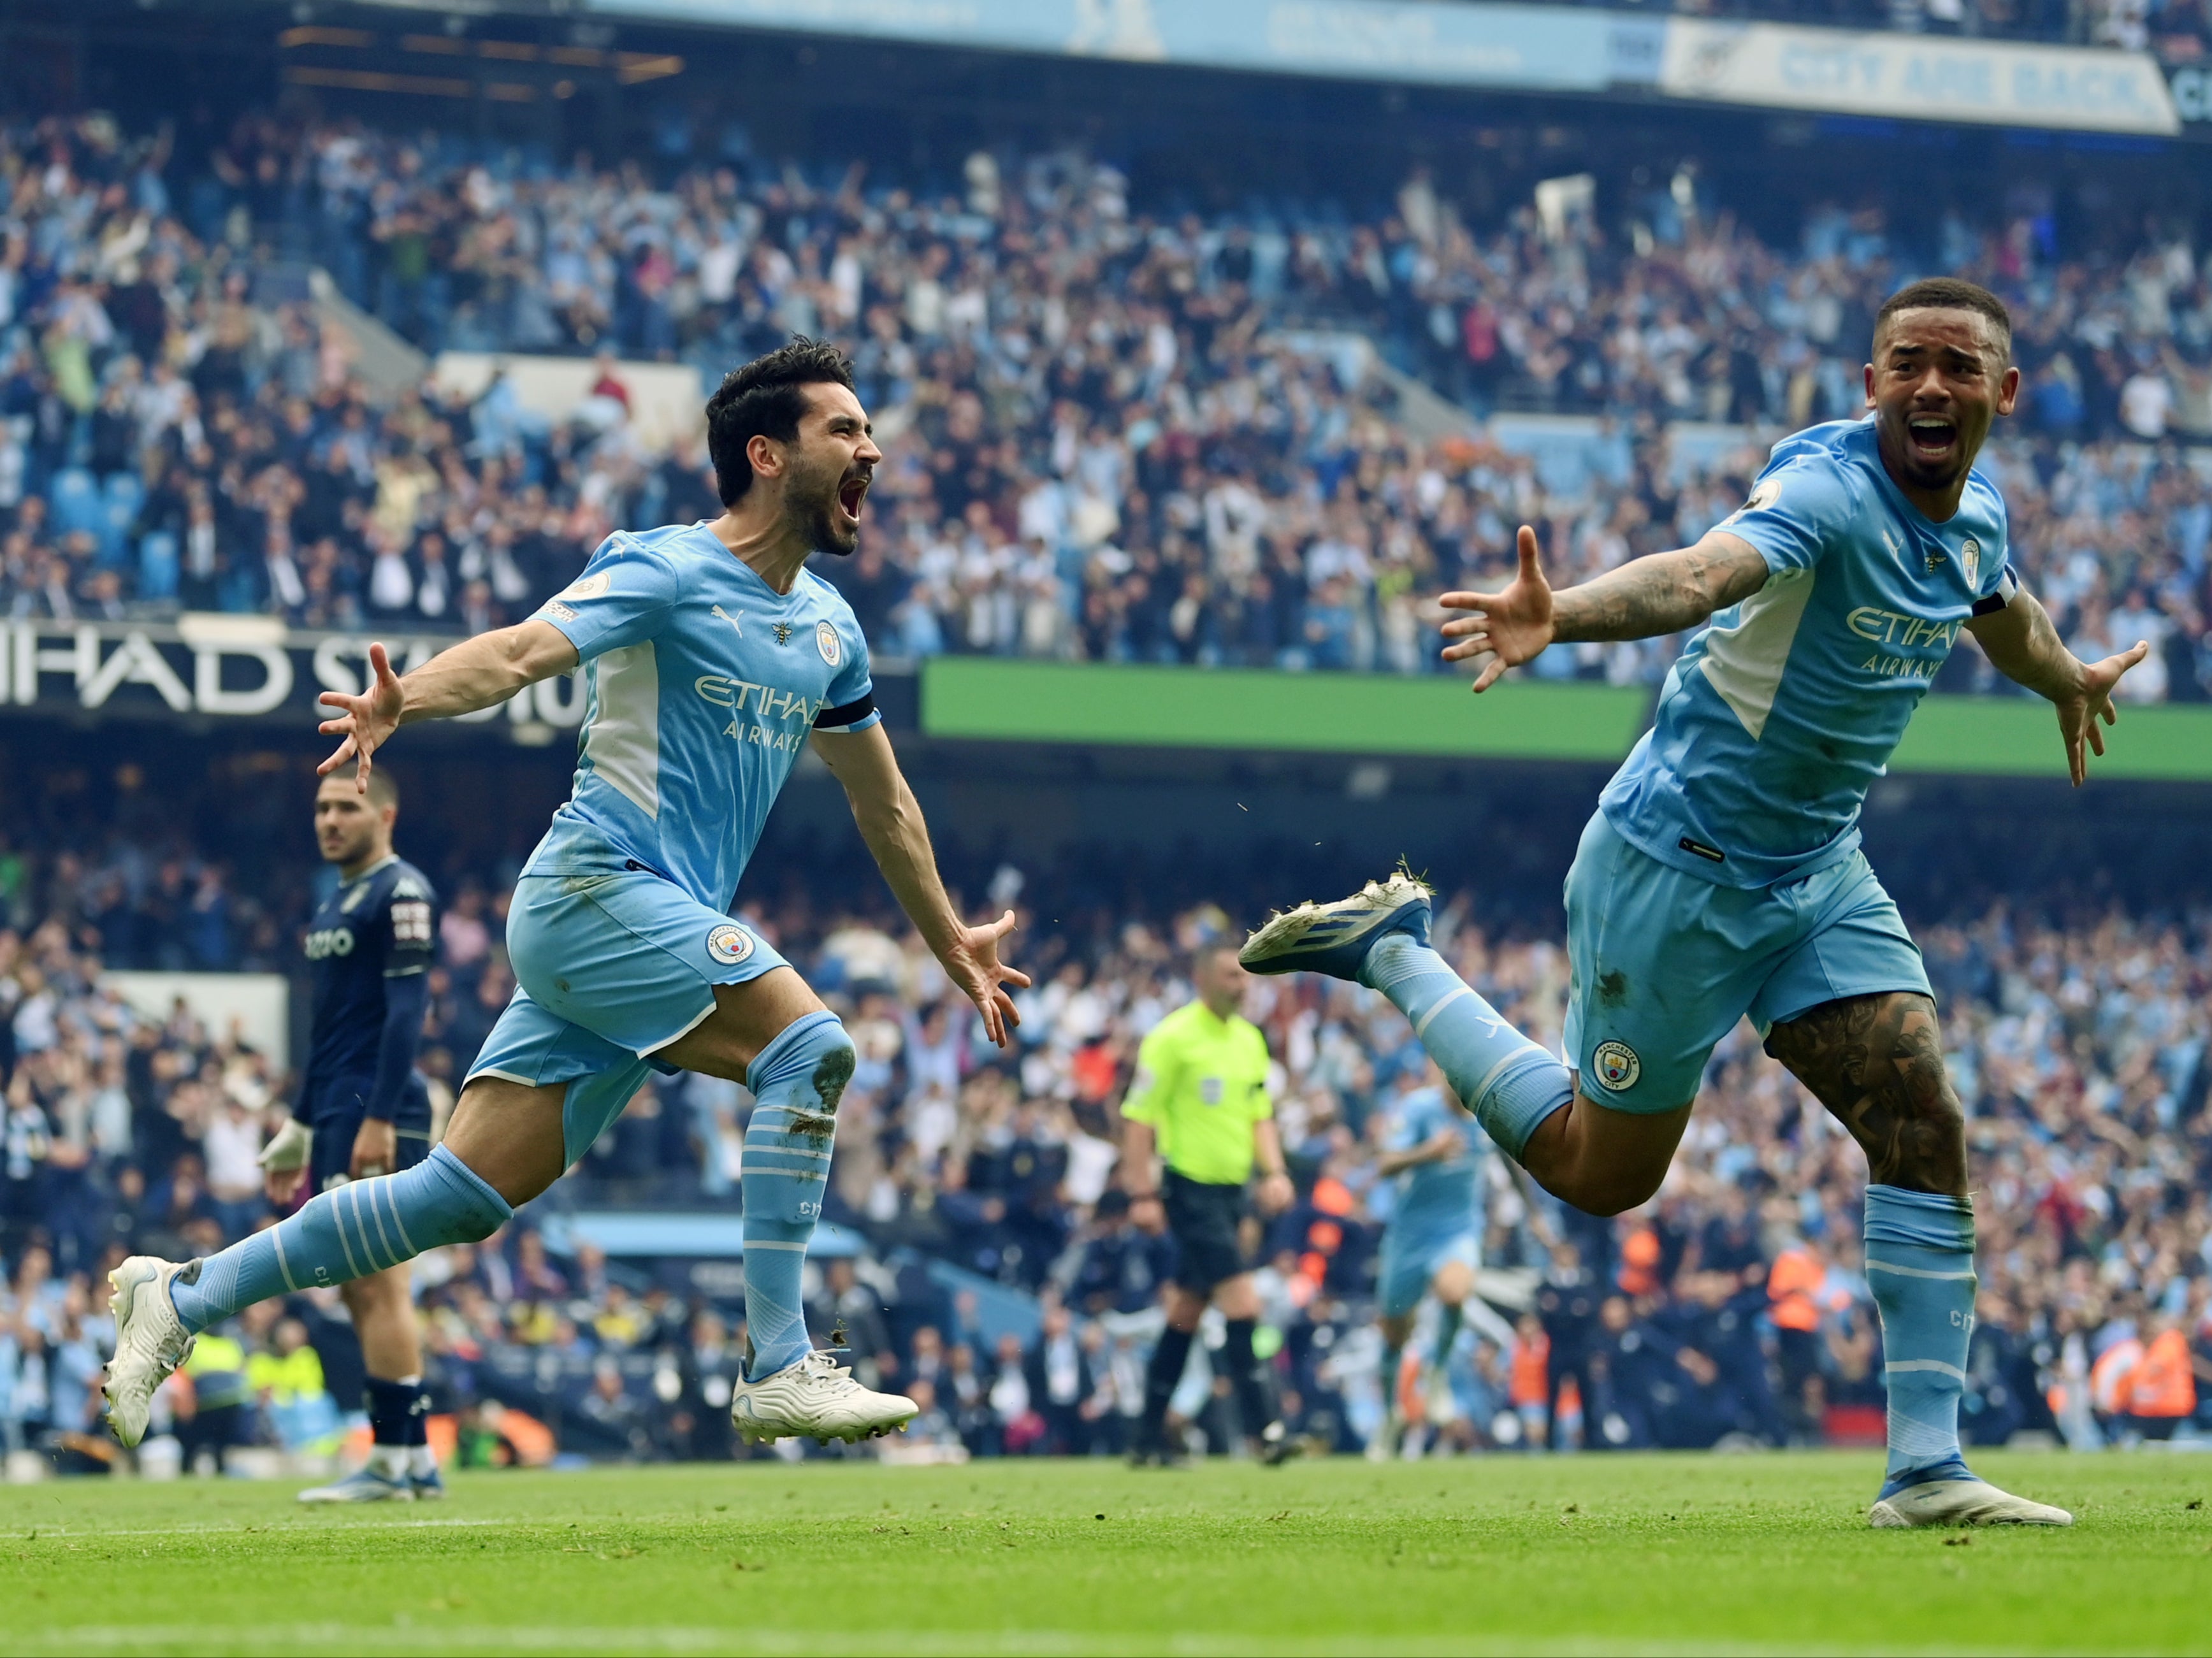 Gundogan (left) scored twice in a stunning conclusion to the game